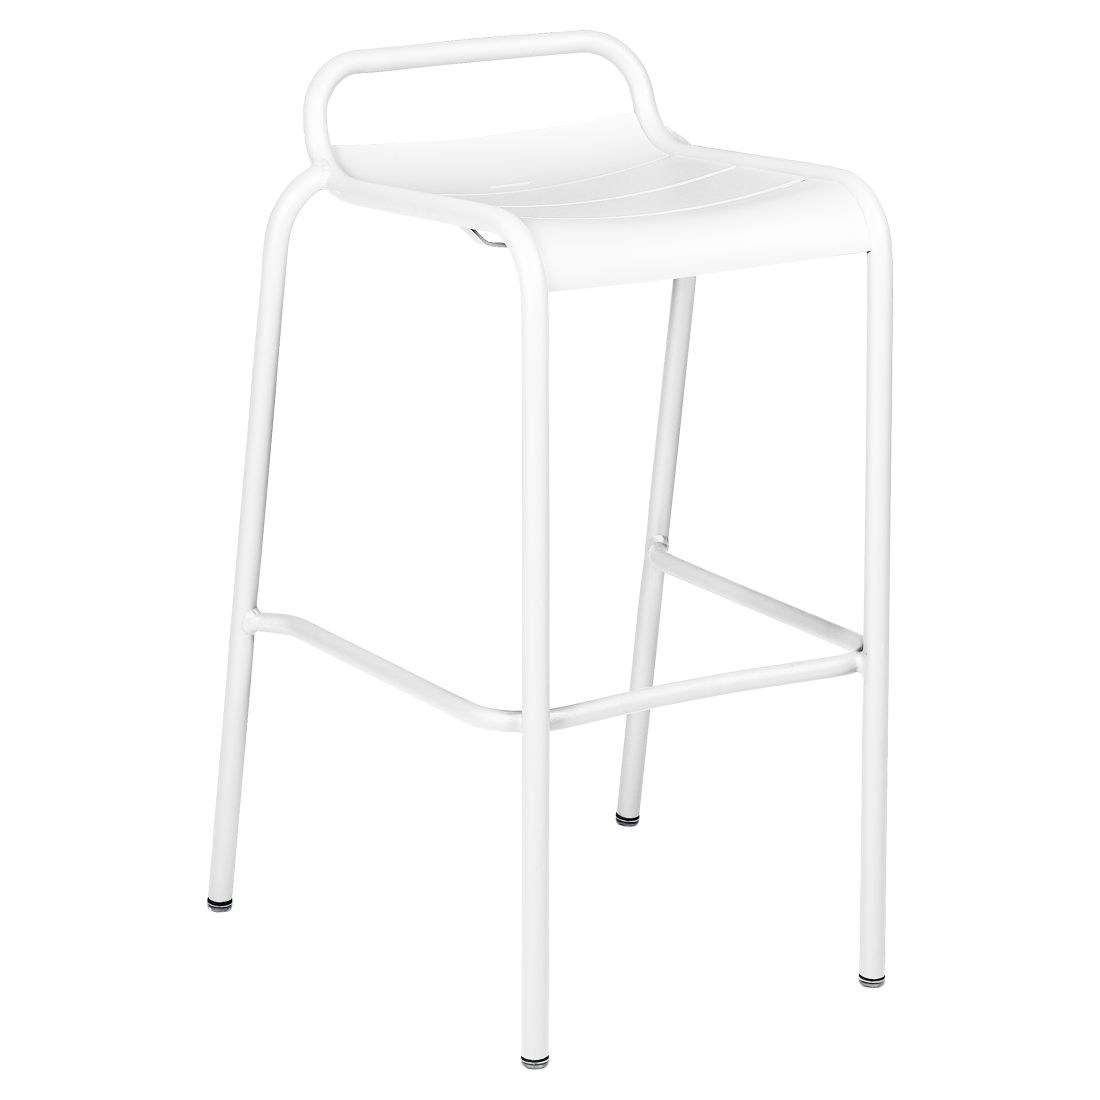 LUXEMBOURG / 4112 BAR STOOL